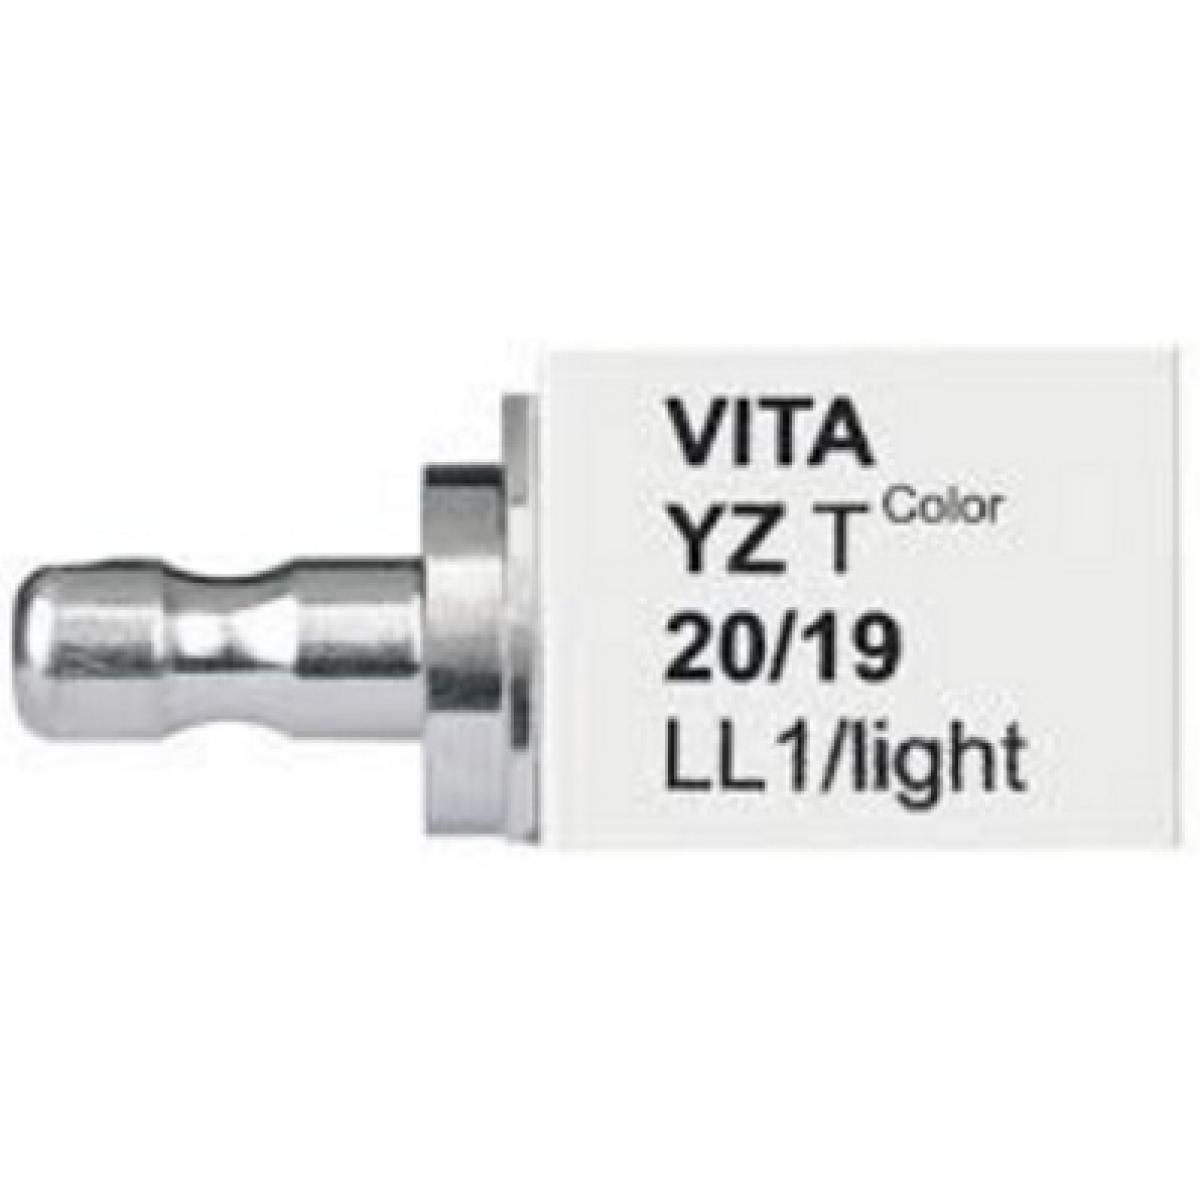 YZ T COLOR LL1 FOR IN LAB YZ20 19 CX1 VITA -